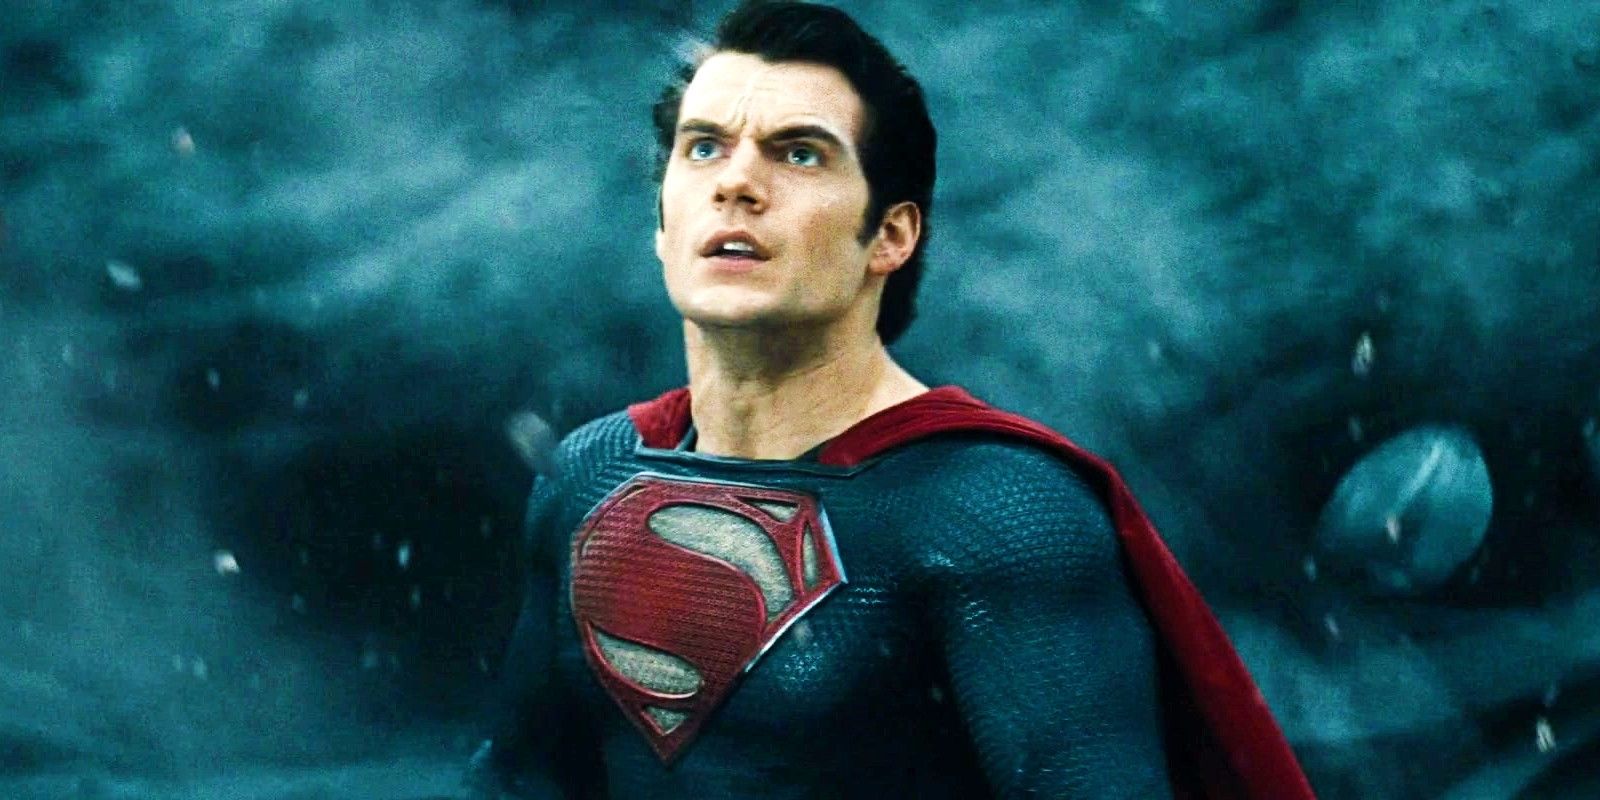 Henry Cavill As Superman Looking Up in Man of Steel